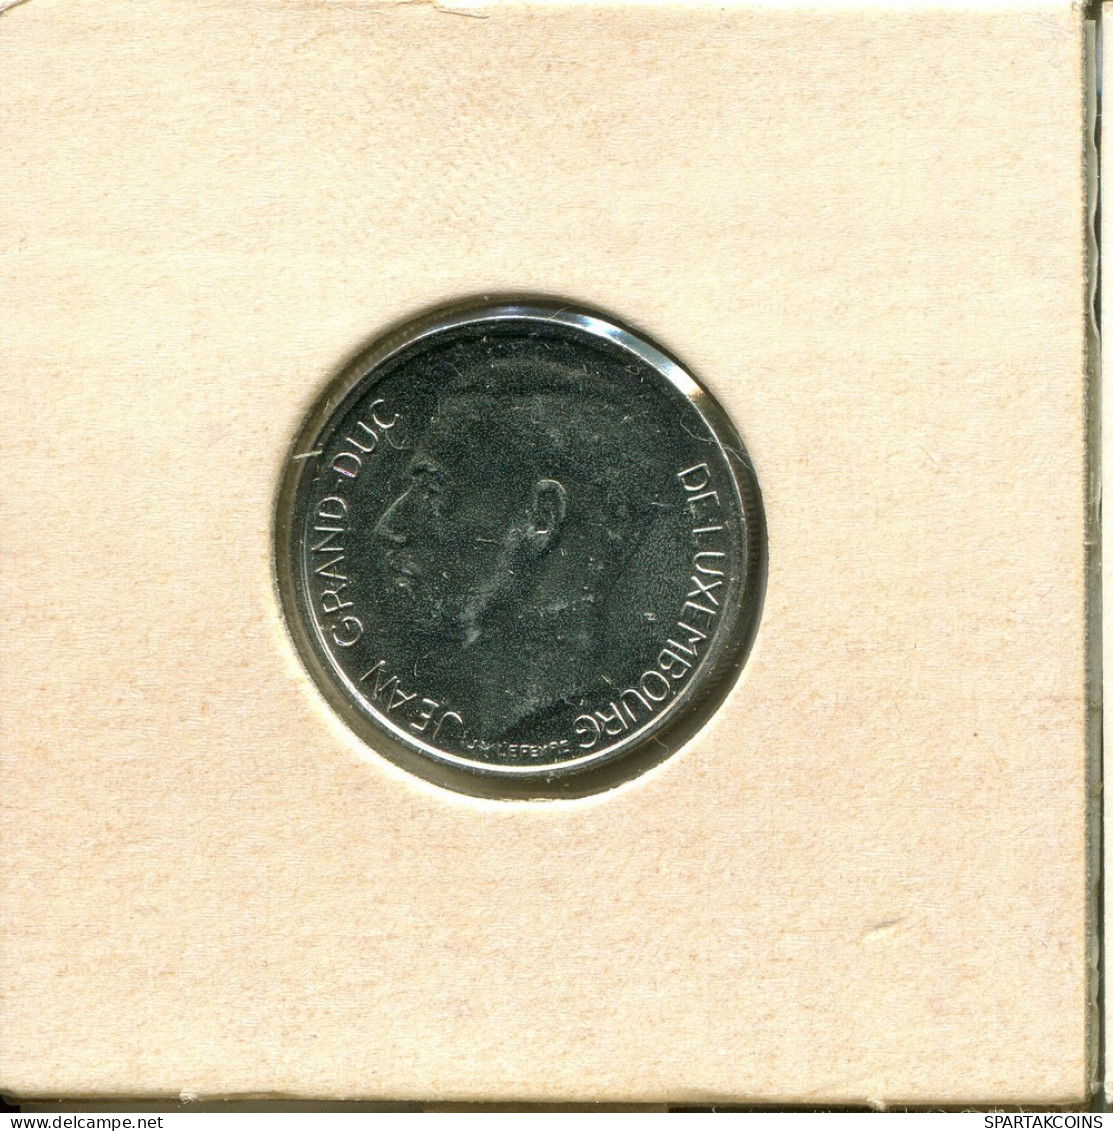 1 FRANC 1980 LUXEMBOURG Coin #AT216.U.A - Luxemburgo